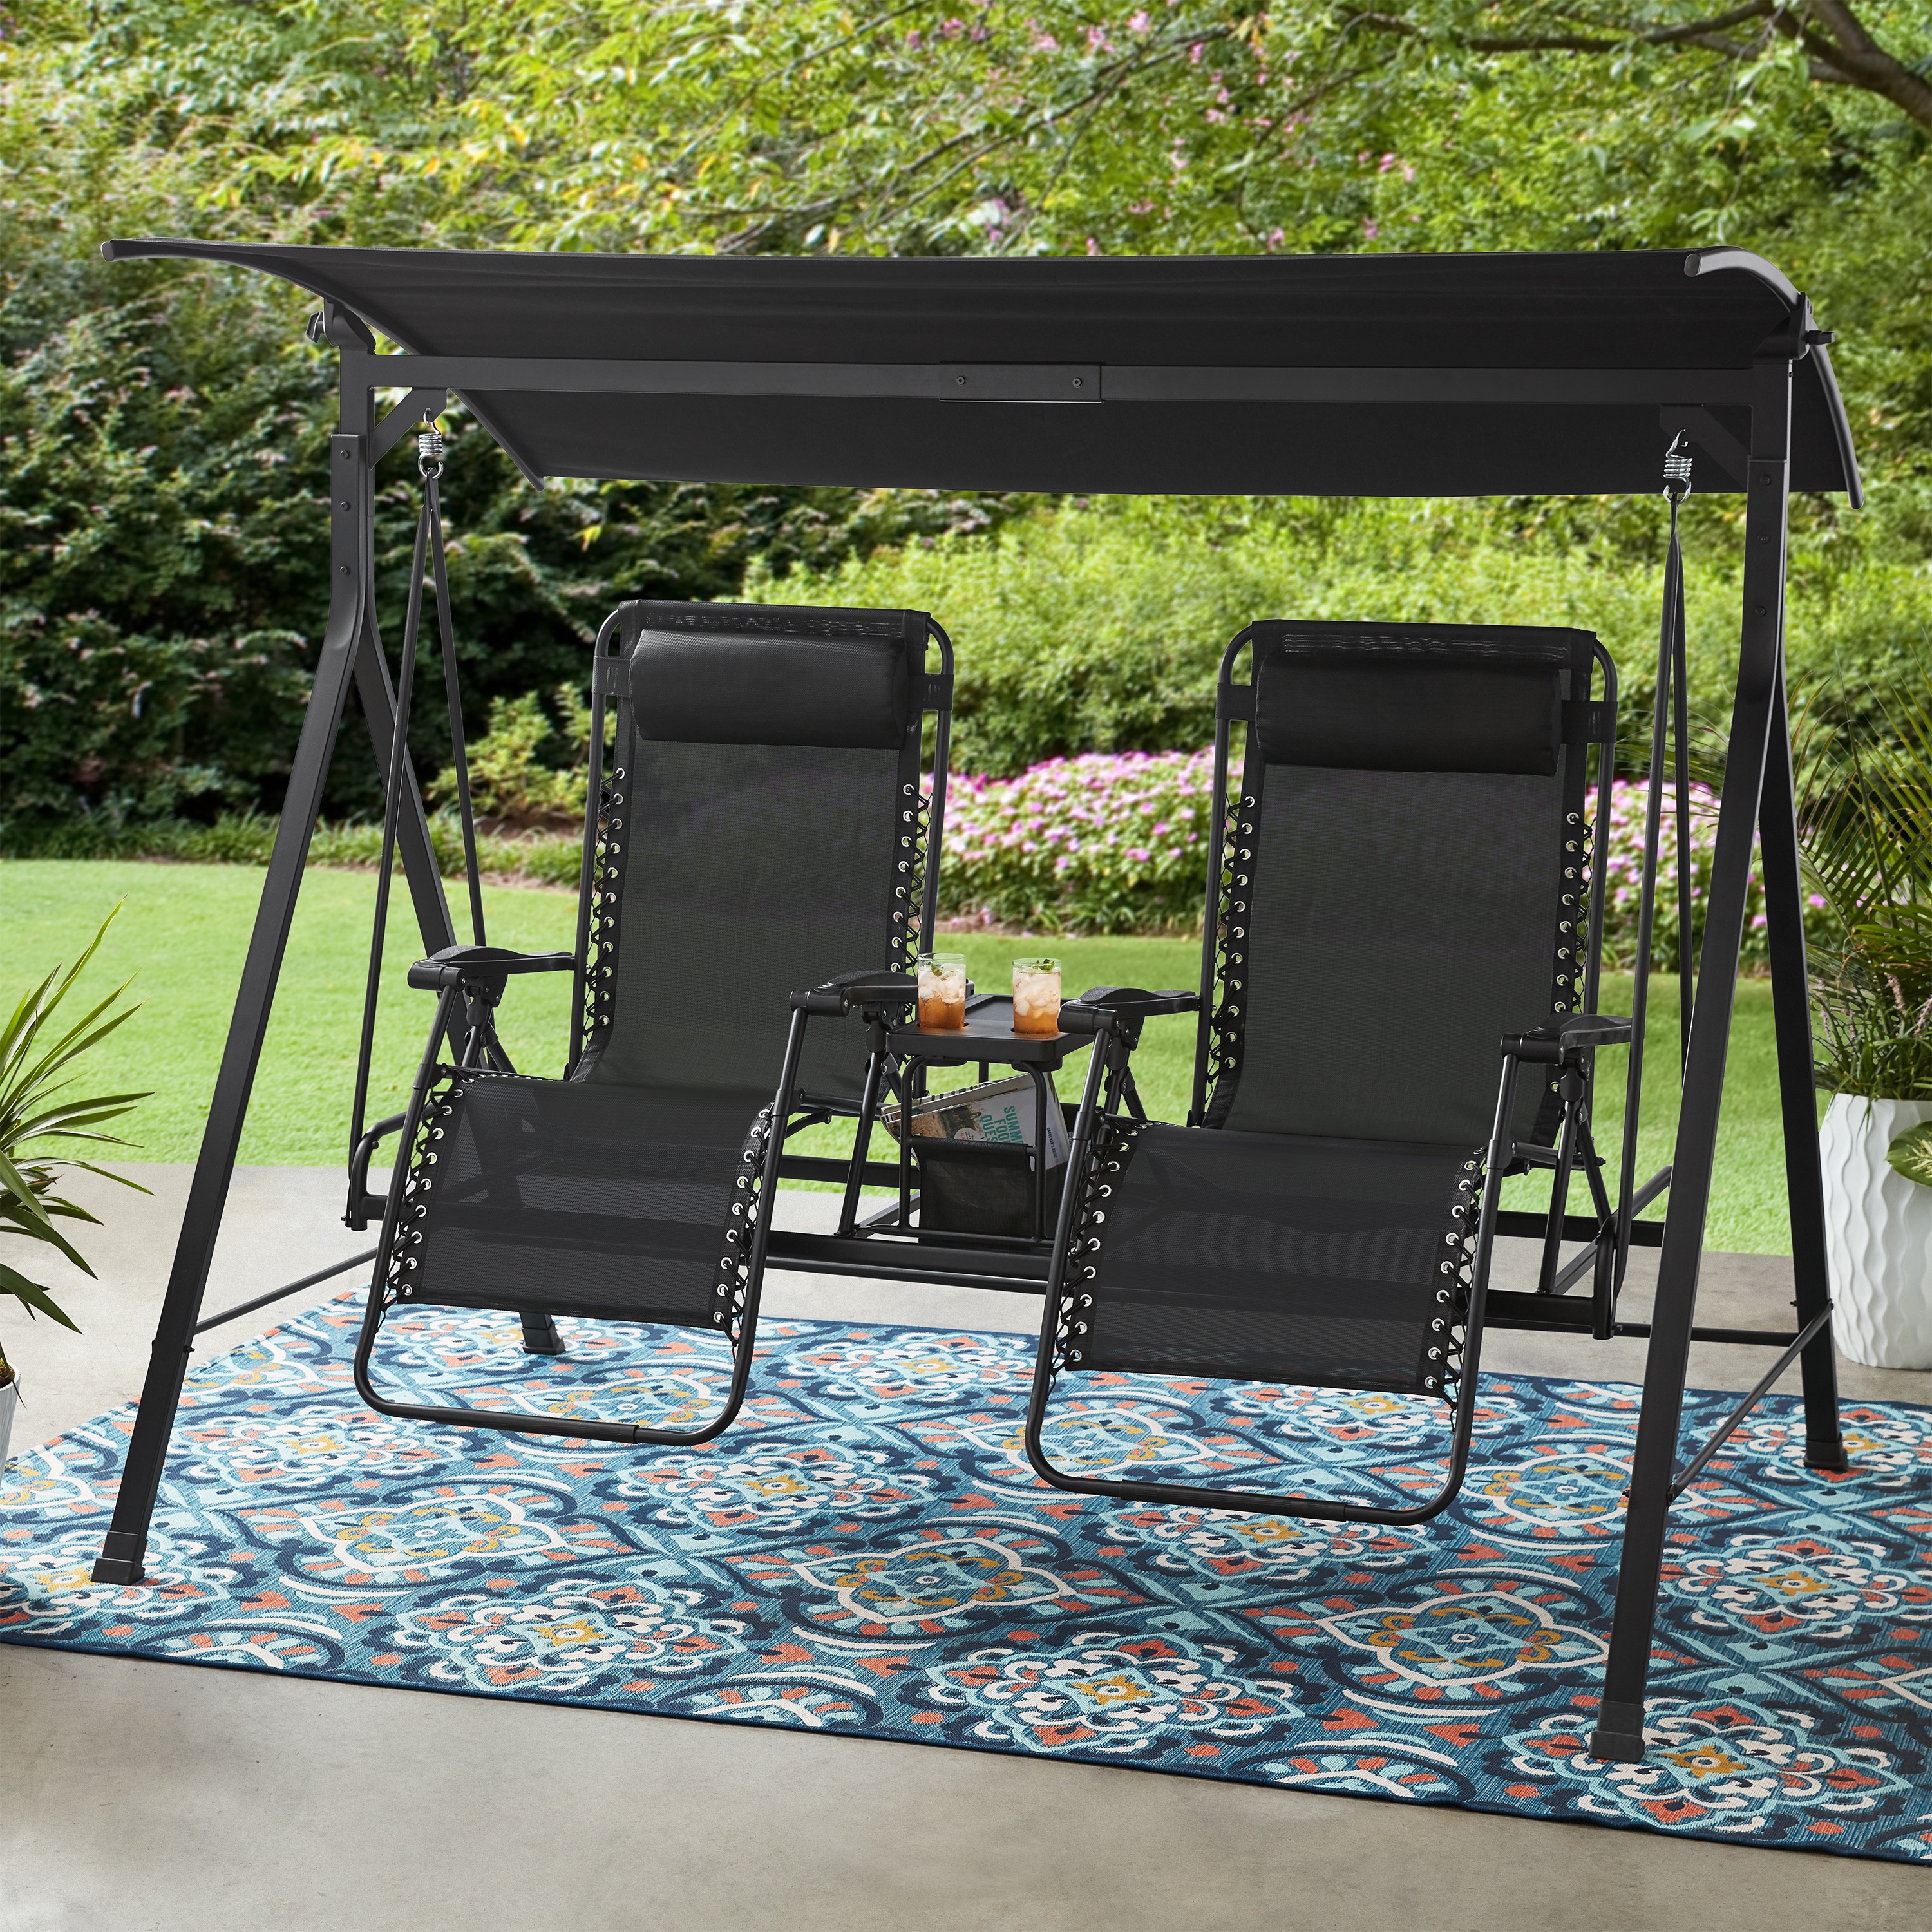 Mainstays 2-Seat Reclining Oversized Zero-Gravity Swing with Canopy and Center Storage Console, Black - image 1 of 8